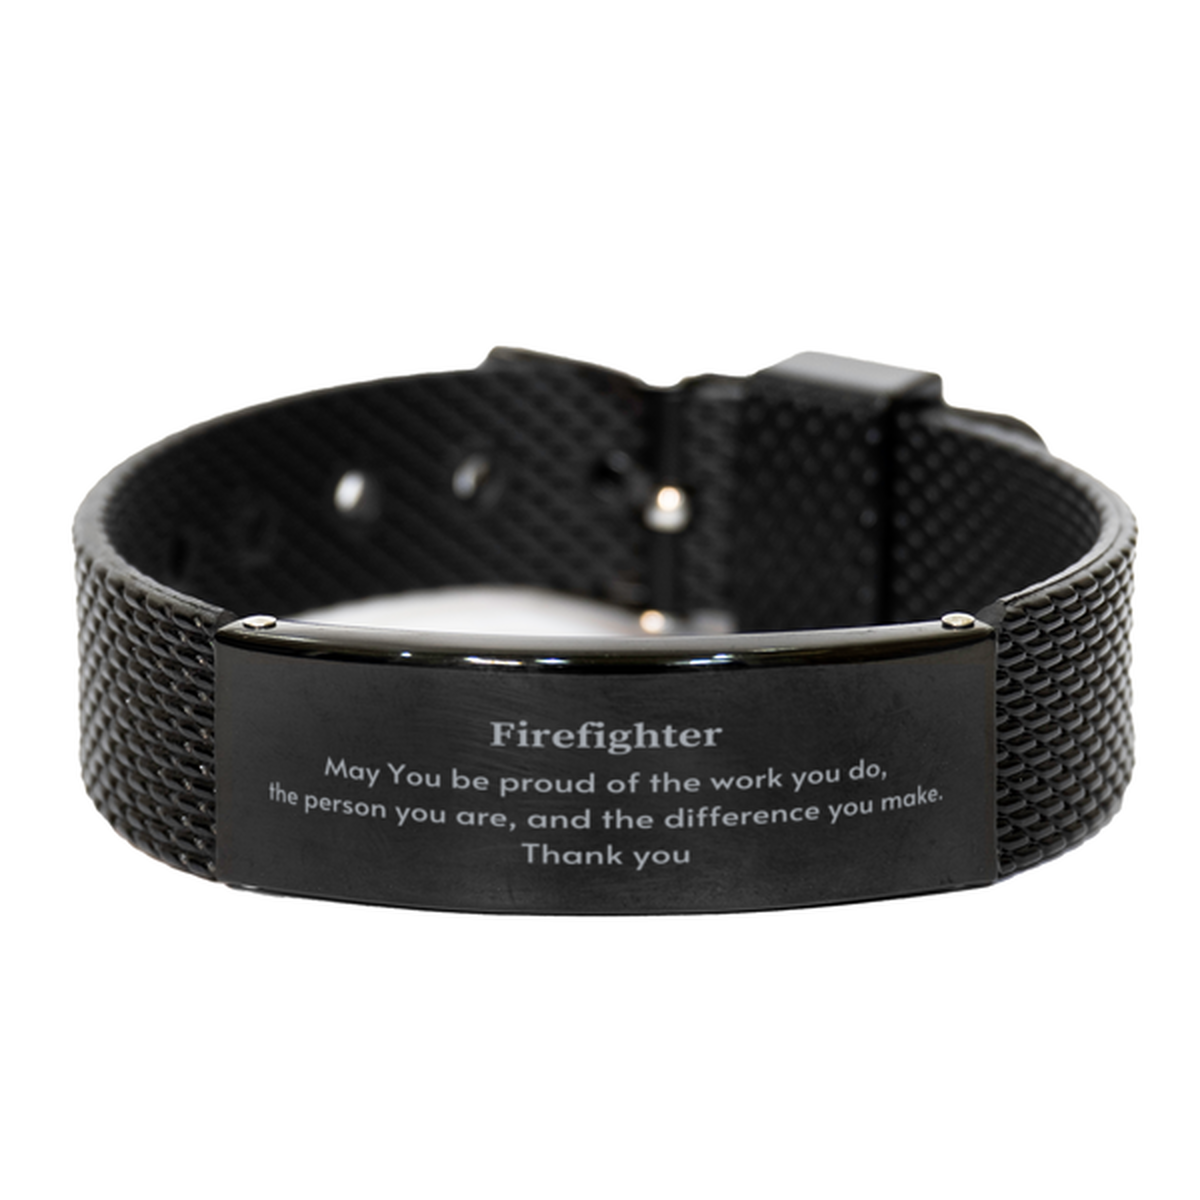 Heartwarming Black Shark Mesh Bracelet Retirement Coworkers Gifts for Firefighter, Firefighter May You be proud of the work you do, the person you are Gifts for Boss Men Women Friends